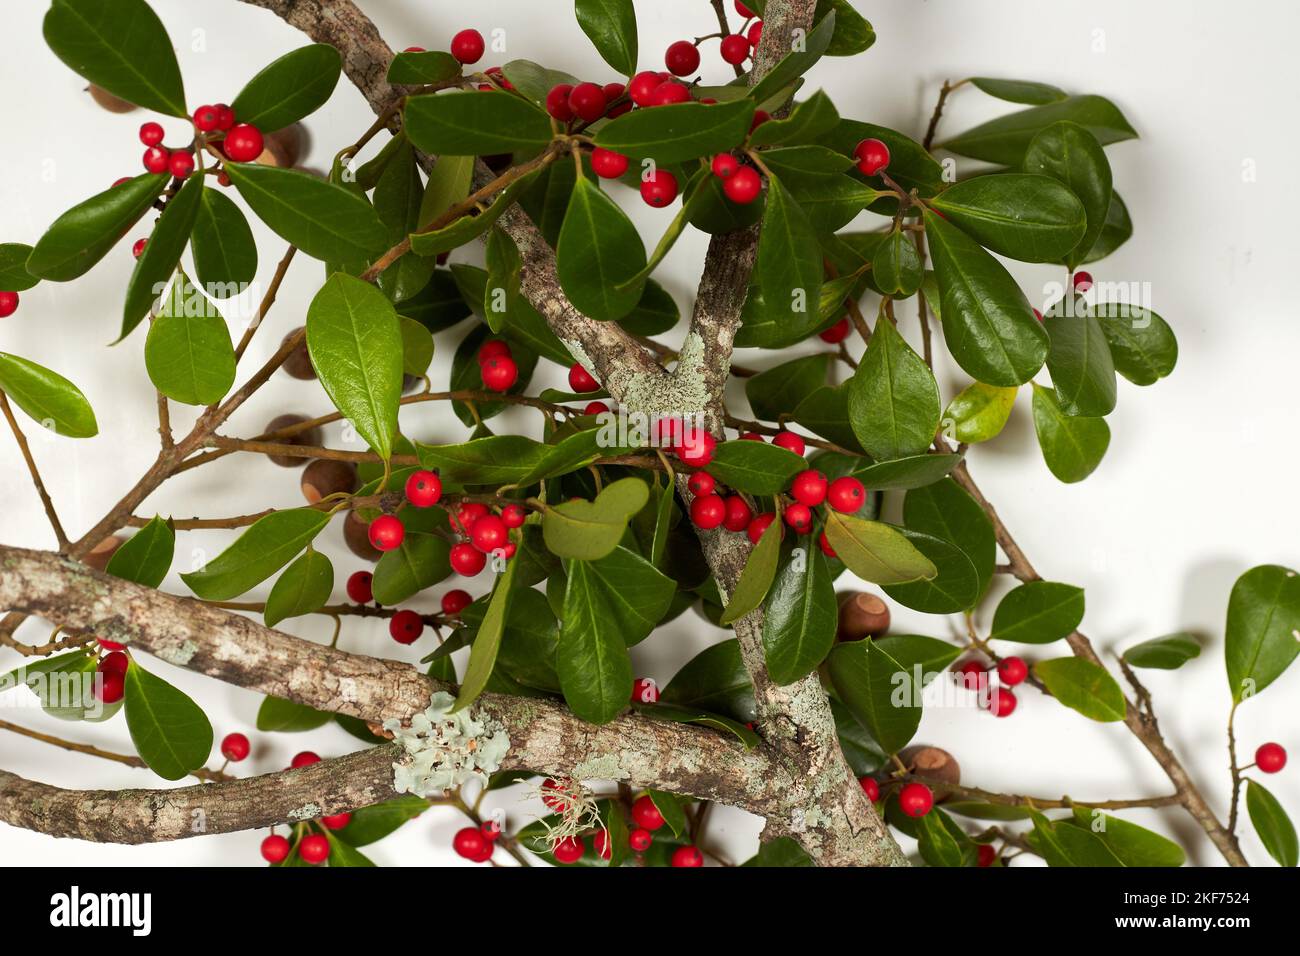 Hawthorn Tree branches with Oak branch and Acorns would make a good table decoration for Thanksgiving dinner! Stock Photo